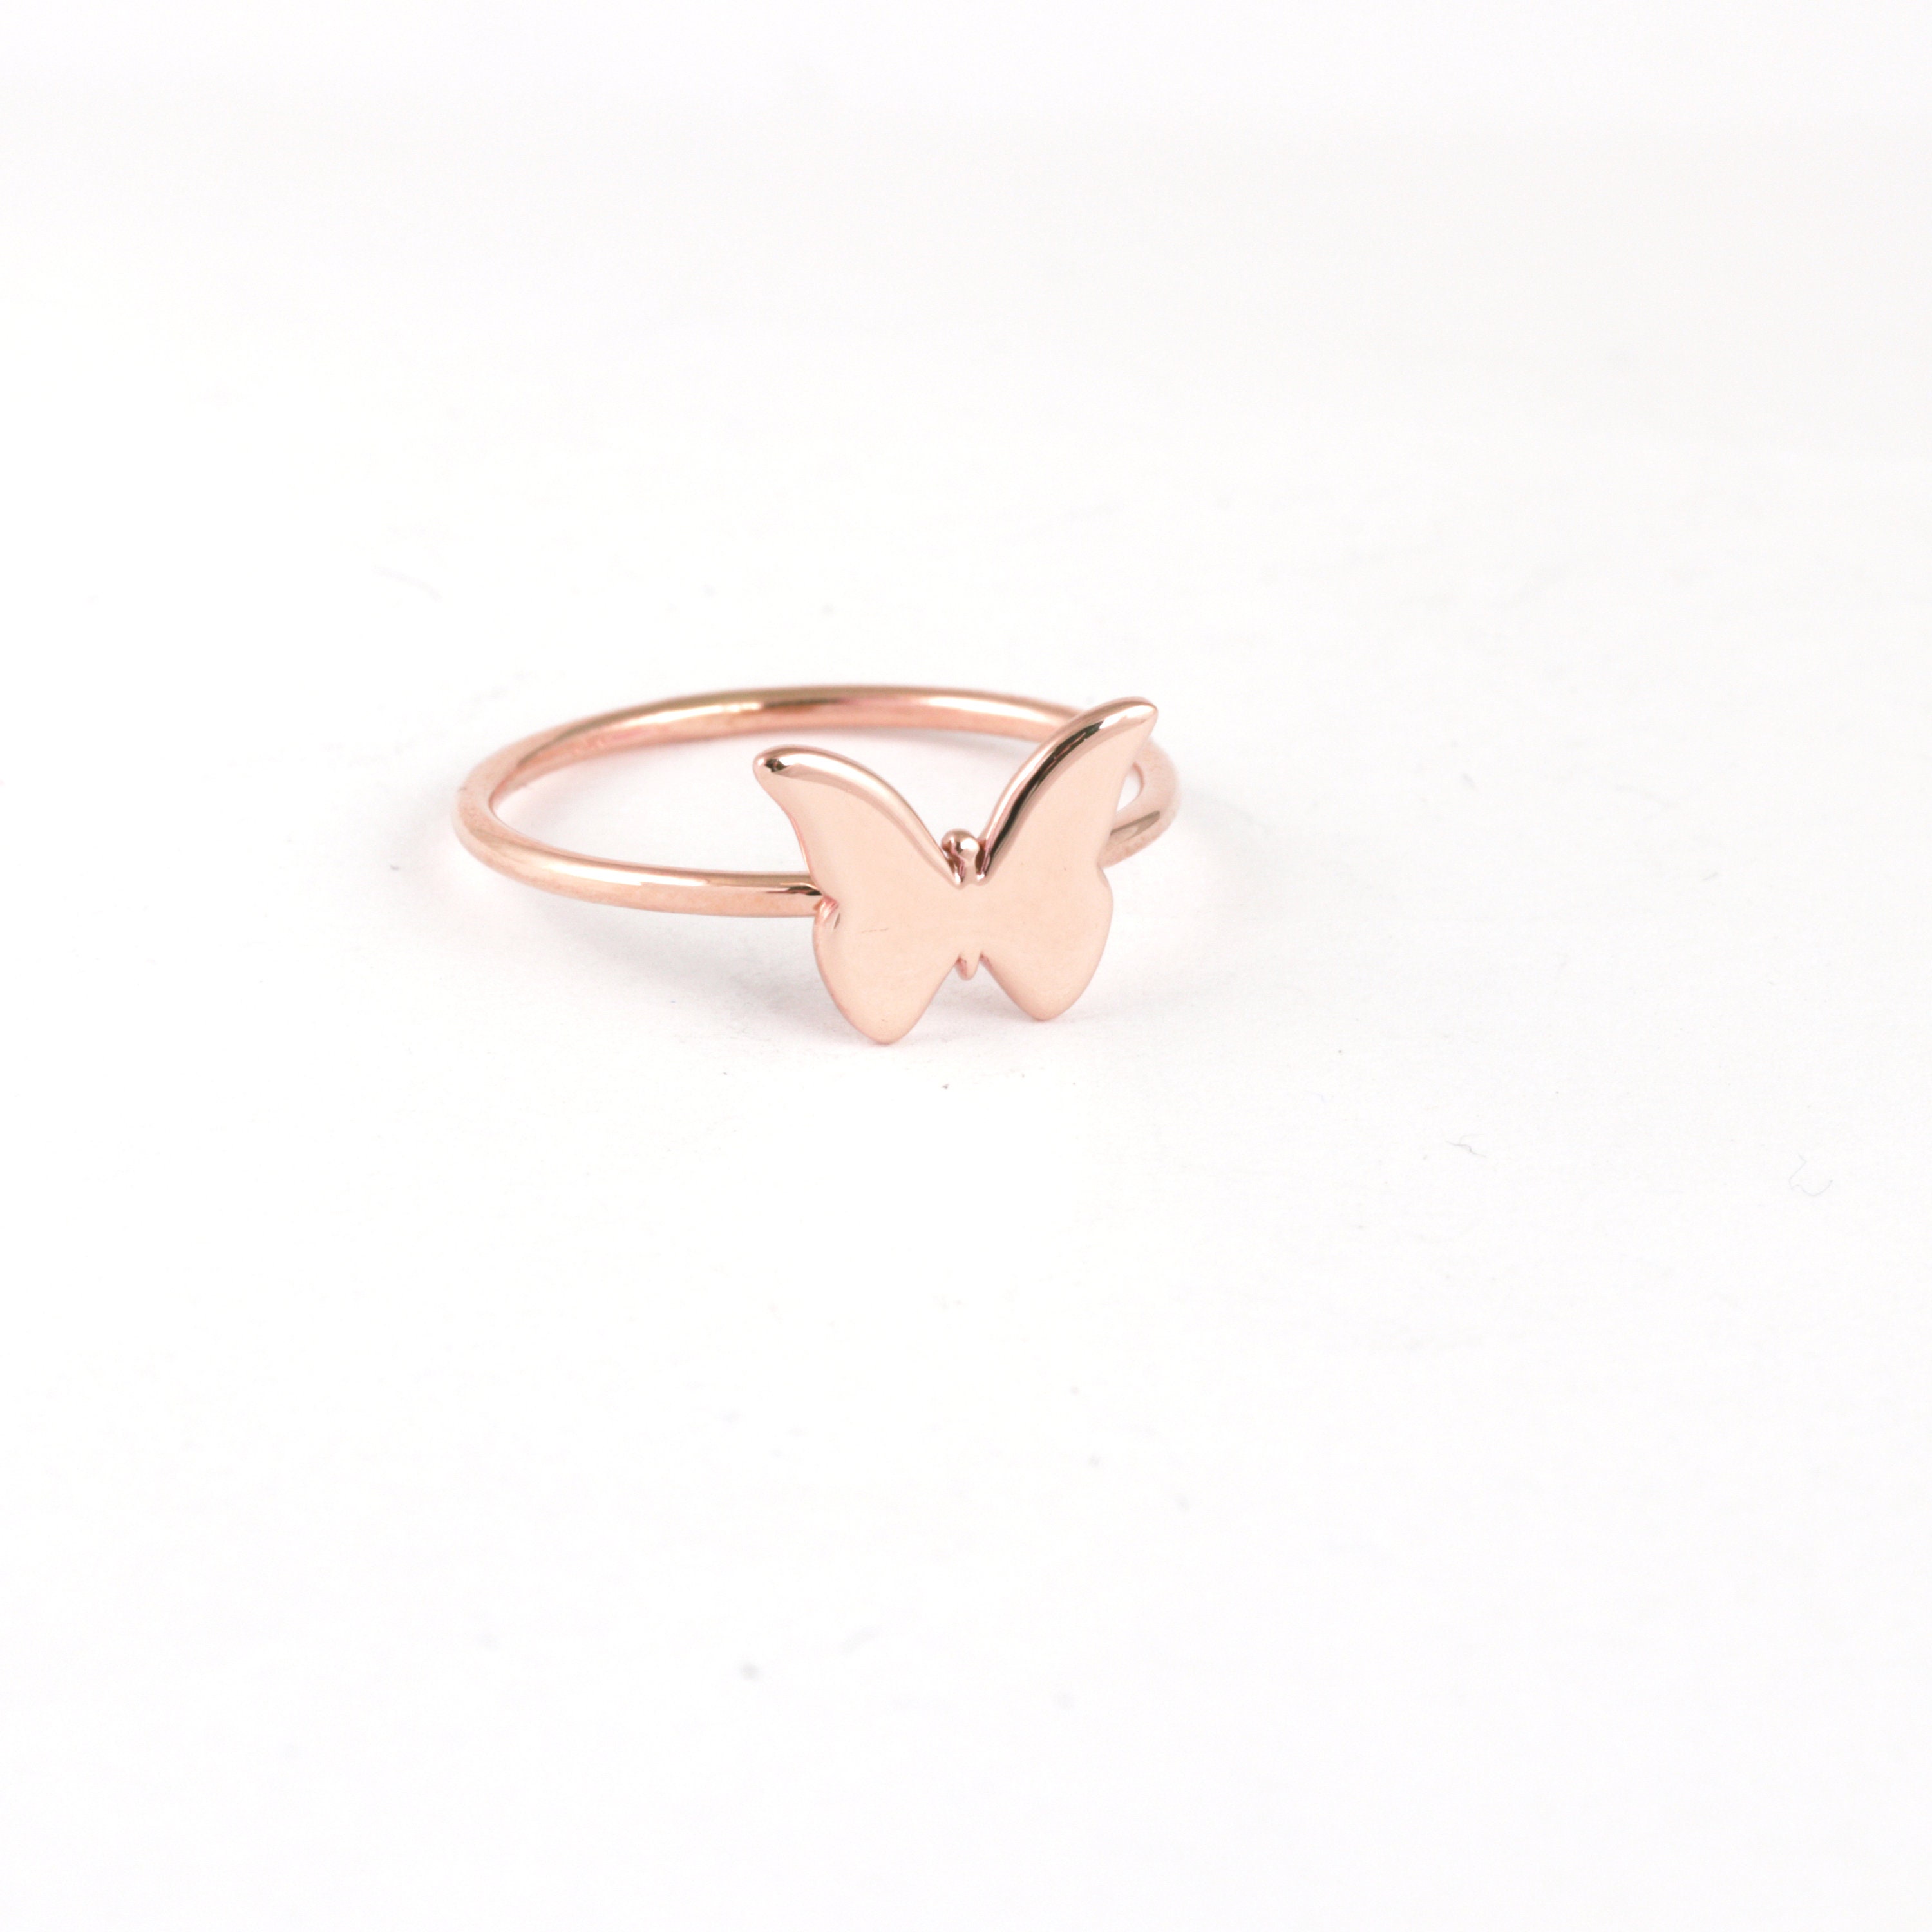 Buy Adorable Gold Butterfly Ring, Dainty Butterfly Ring in Gold, Princess  Jewelry, Little Girl Jewelry, Tiny Butterfly Ring, Childrens Jewelry Online  in India - Etsy